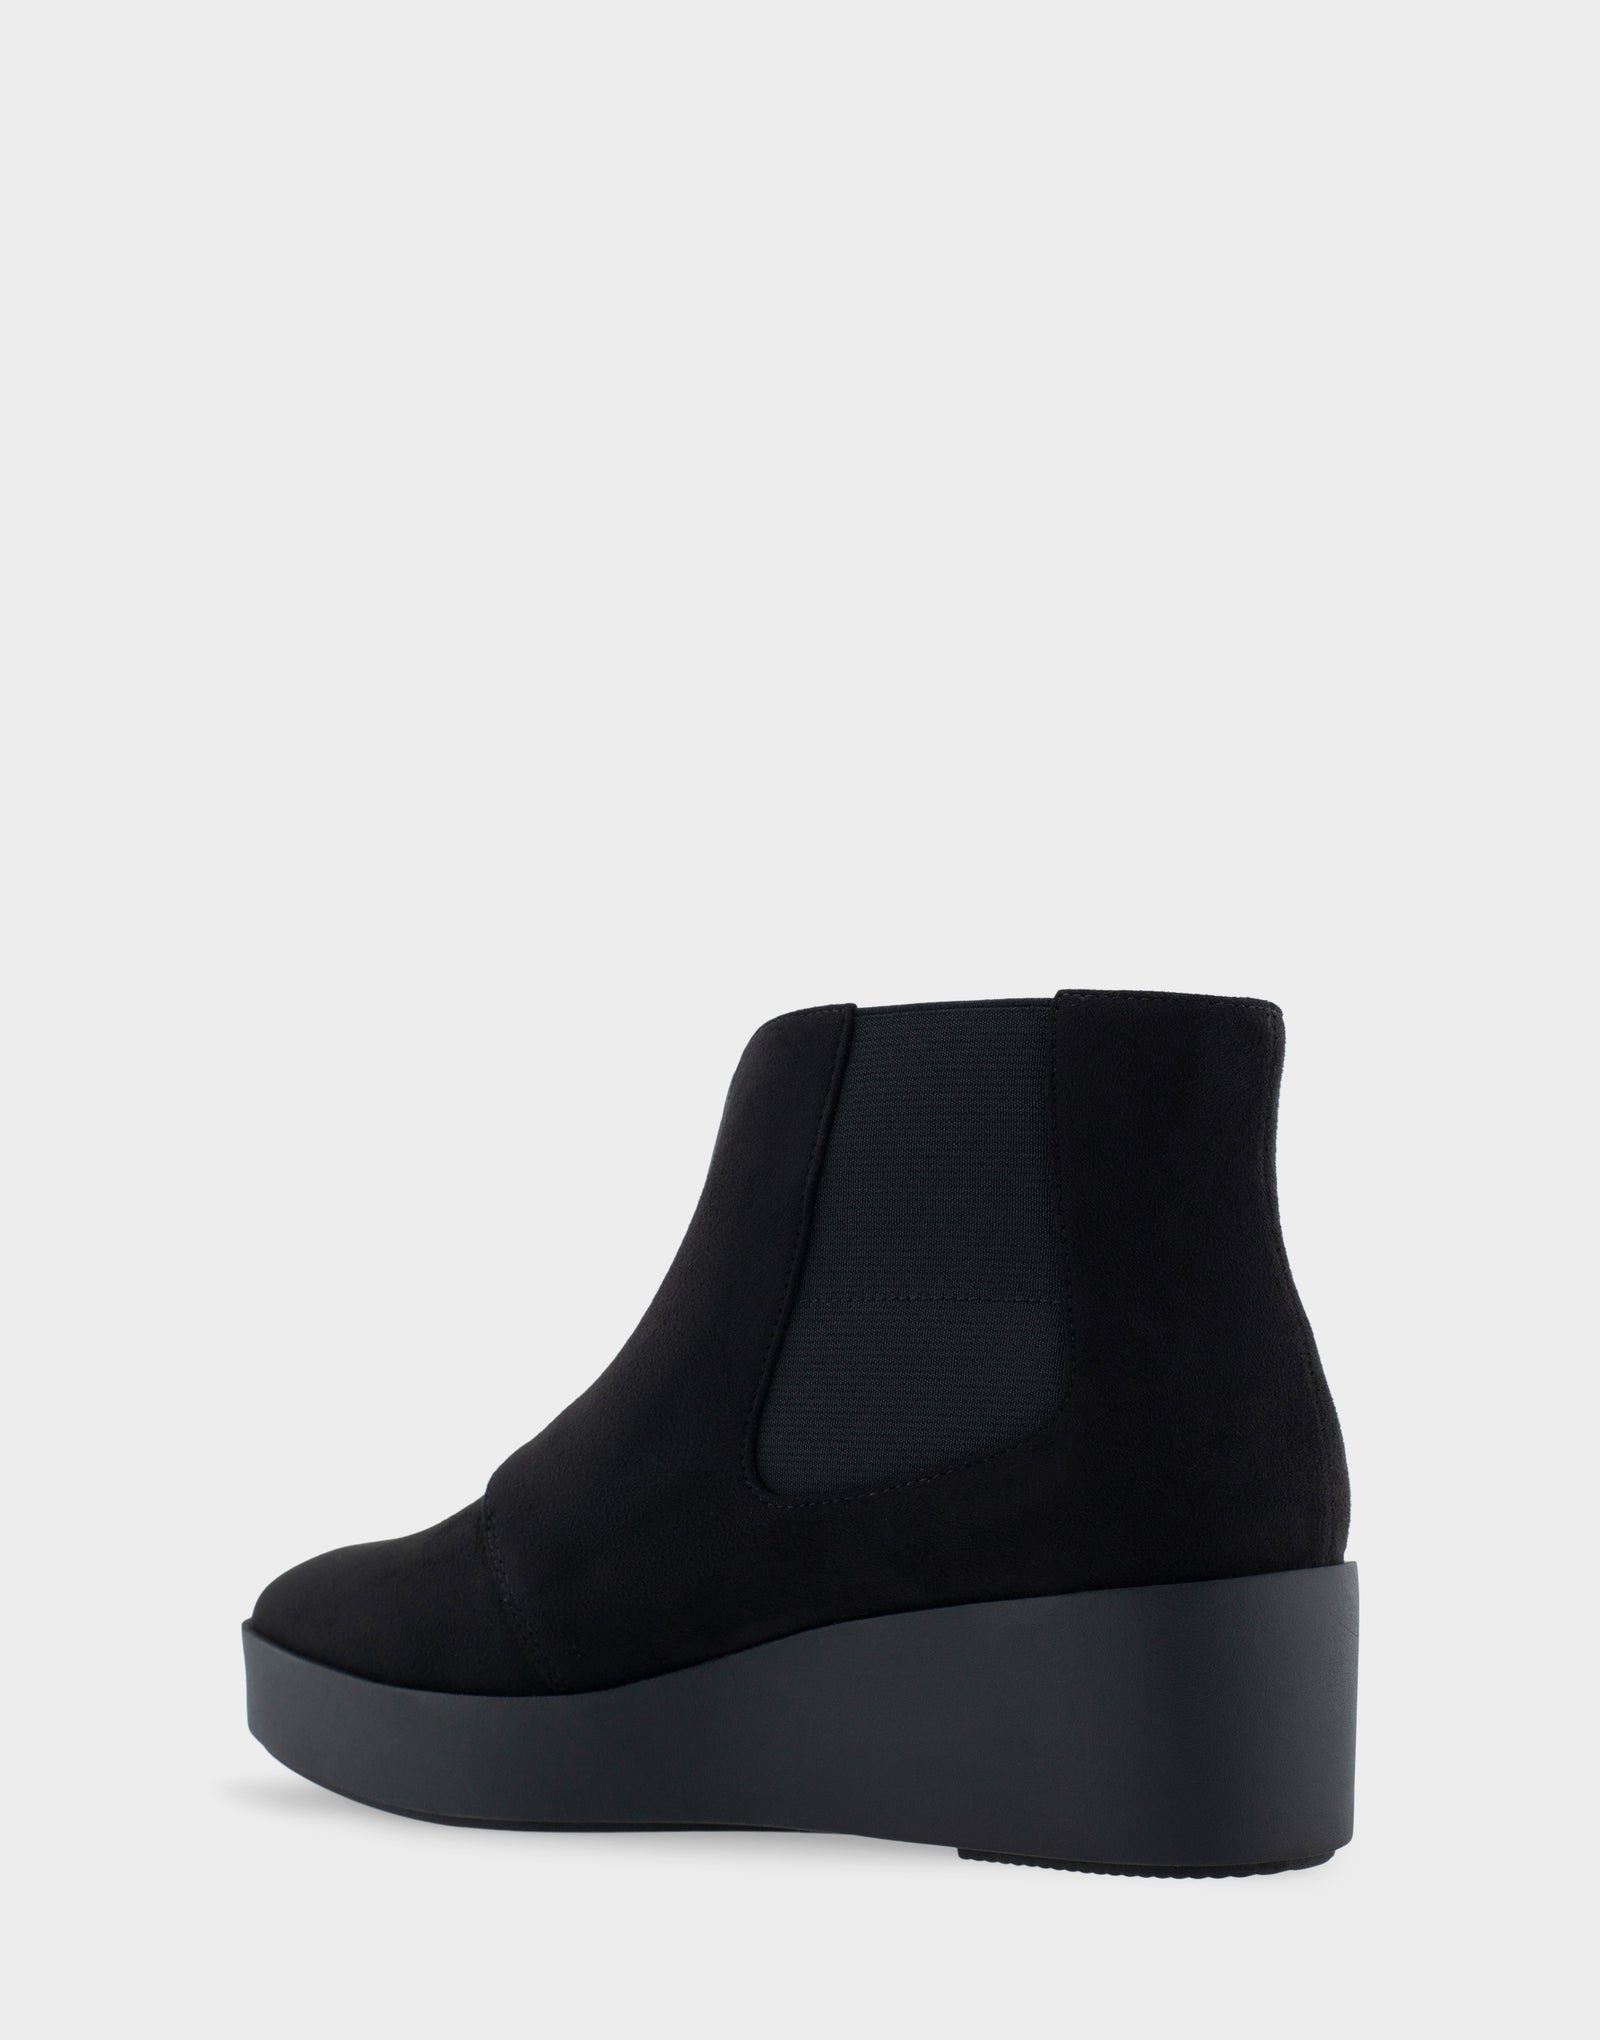 Carin Black Faux Suede Wedge Heel Ankle Boot –